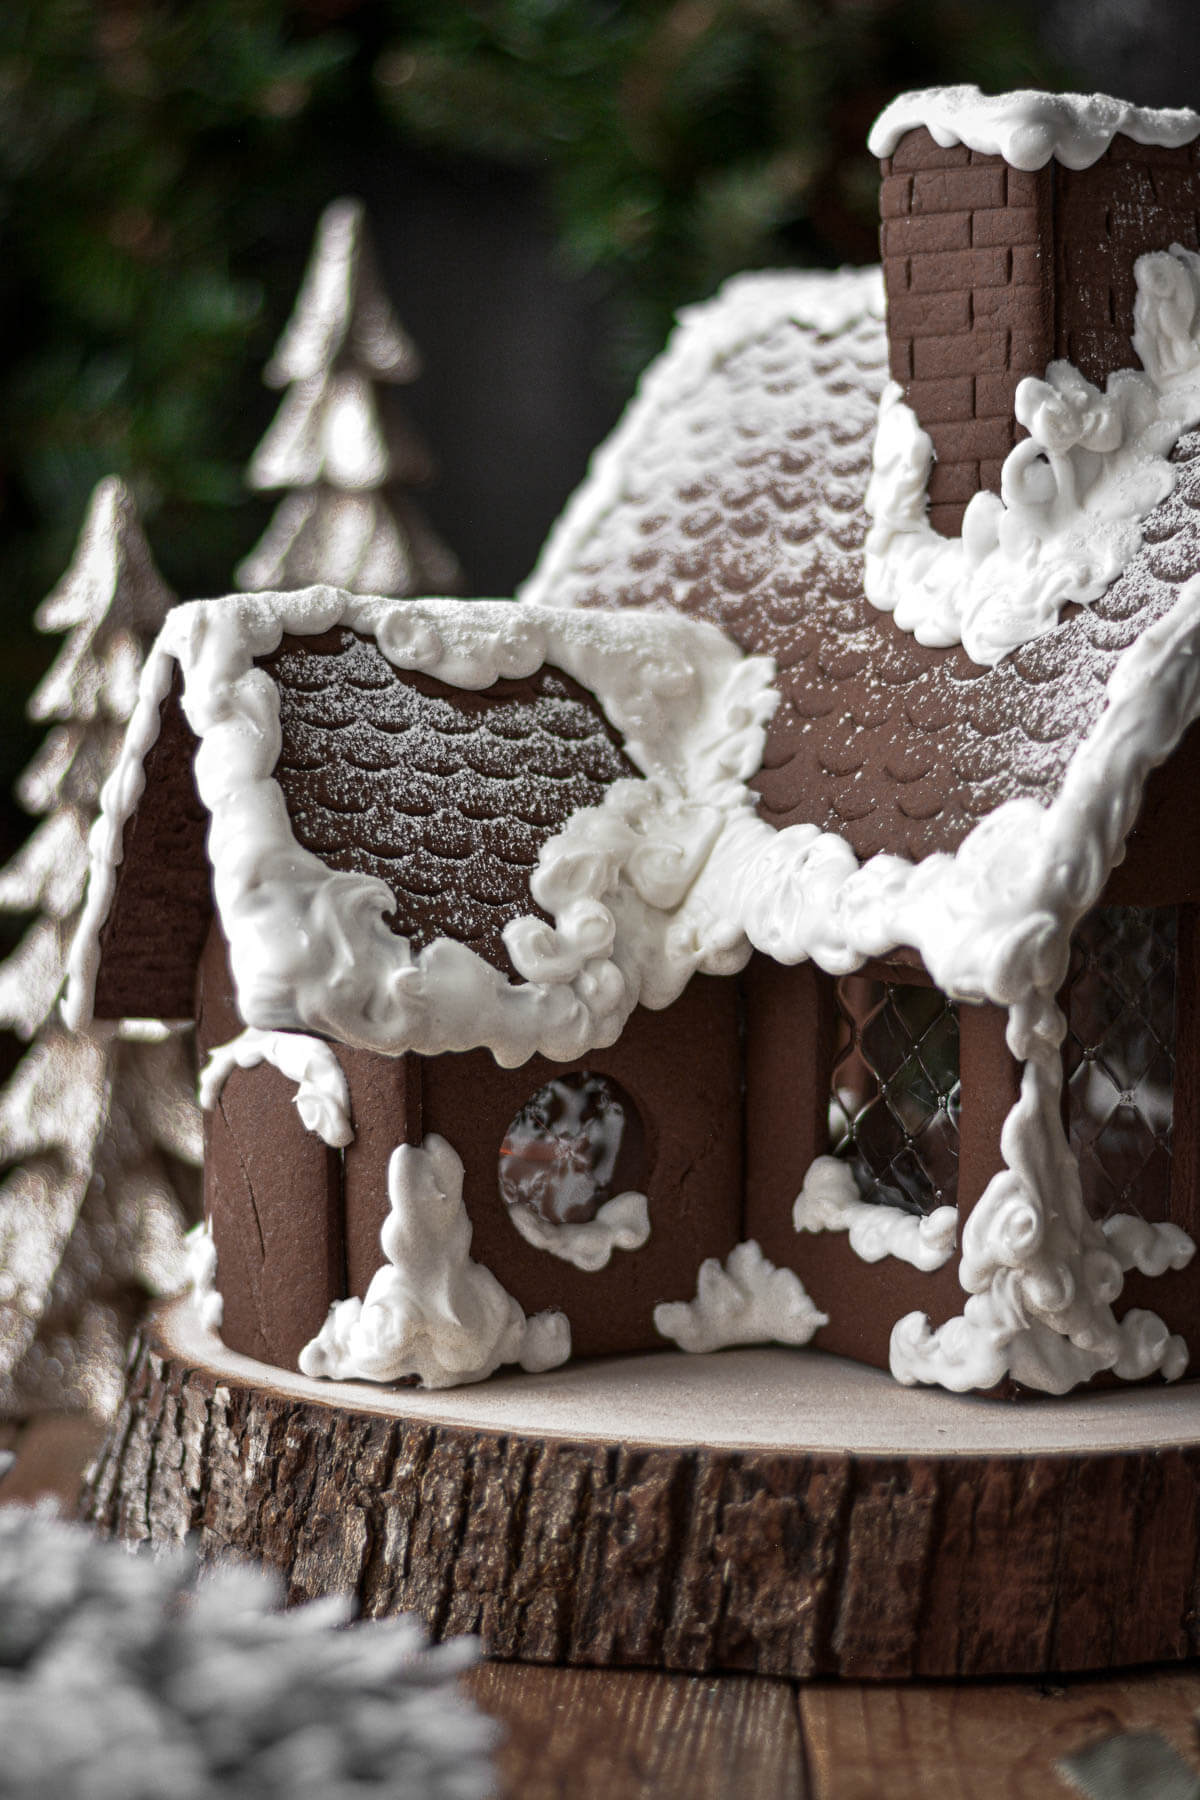 Royal icing snow on a gingerbread house.